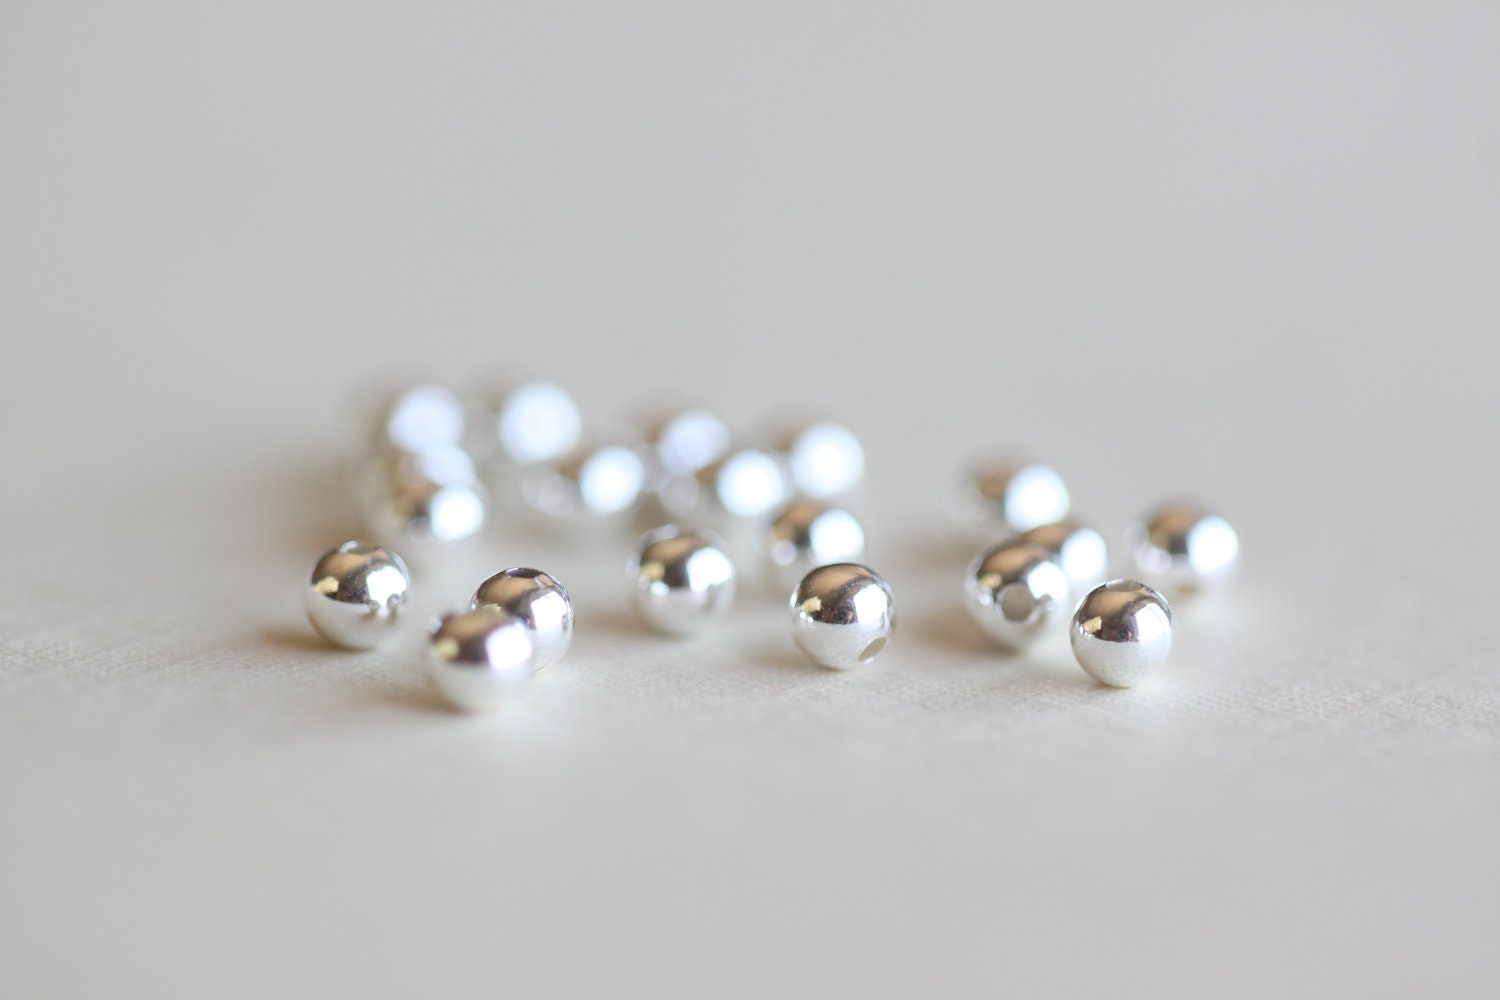 Sterling Silver 3mm Round Beads - 20 pcs smooth and shiny sterling silver tiny beads